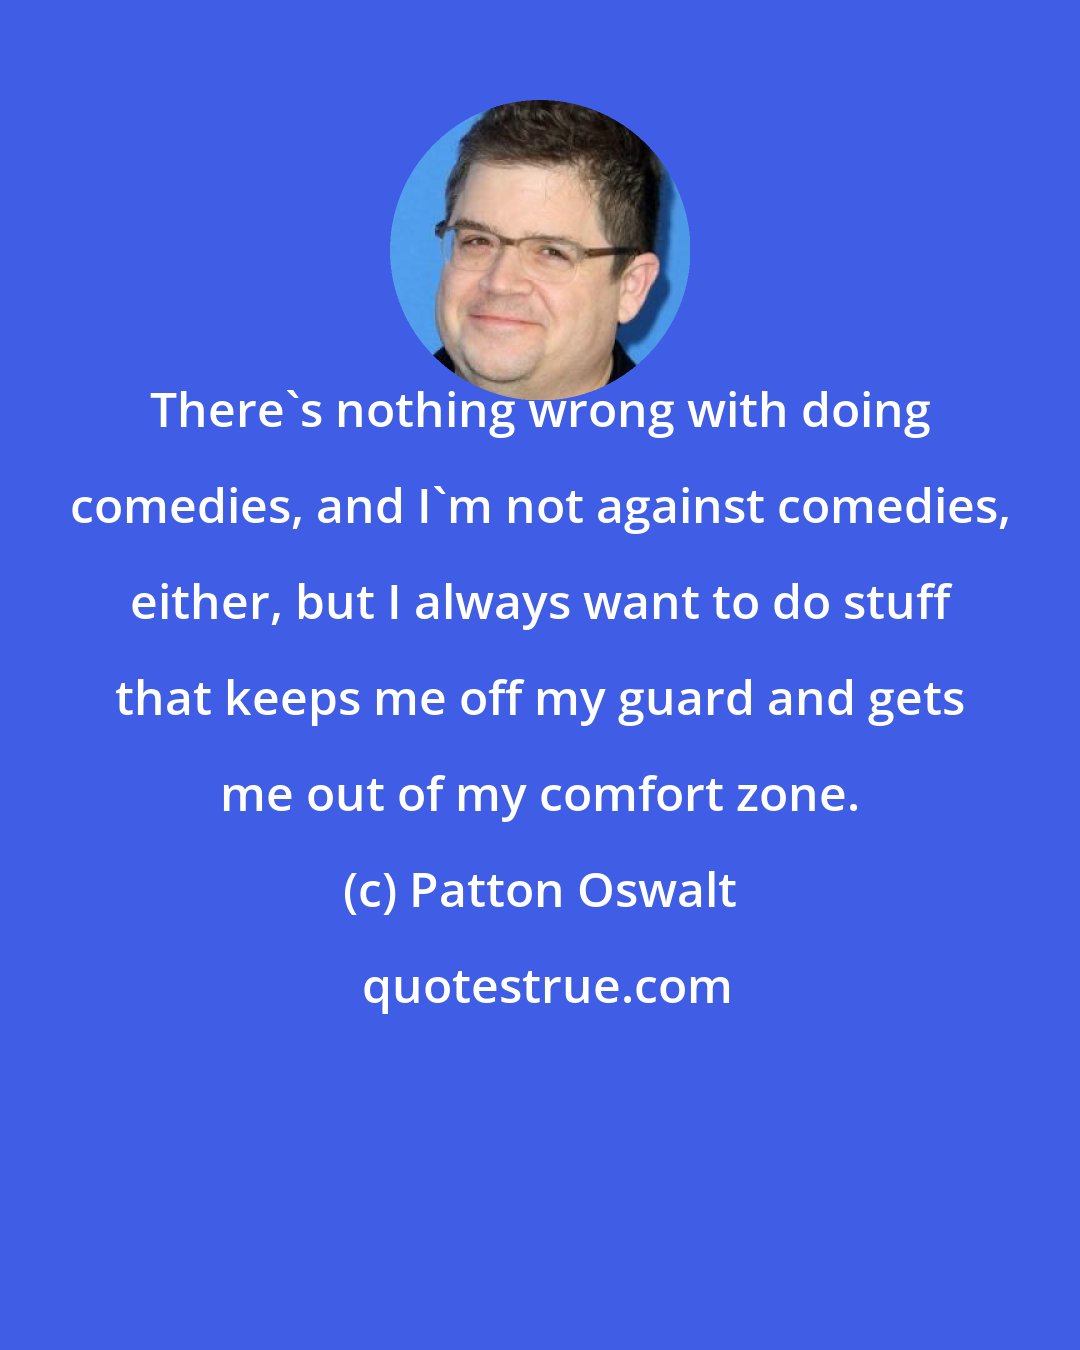 Patton Oswalt: There's nothing wrong with doing comedies, and I'm not against comedies, either, but I always want to do stuff that keeps me off my guard and gets me out of my comfort zone.